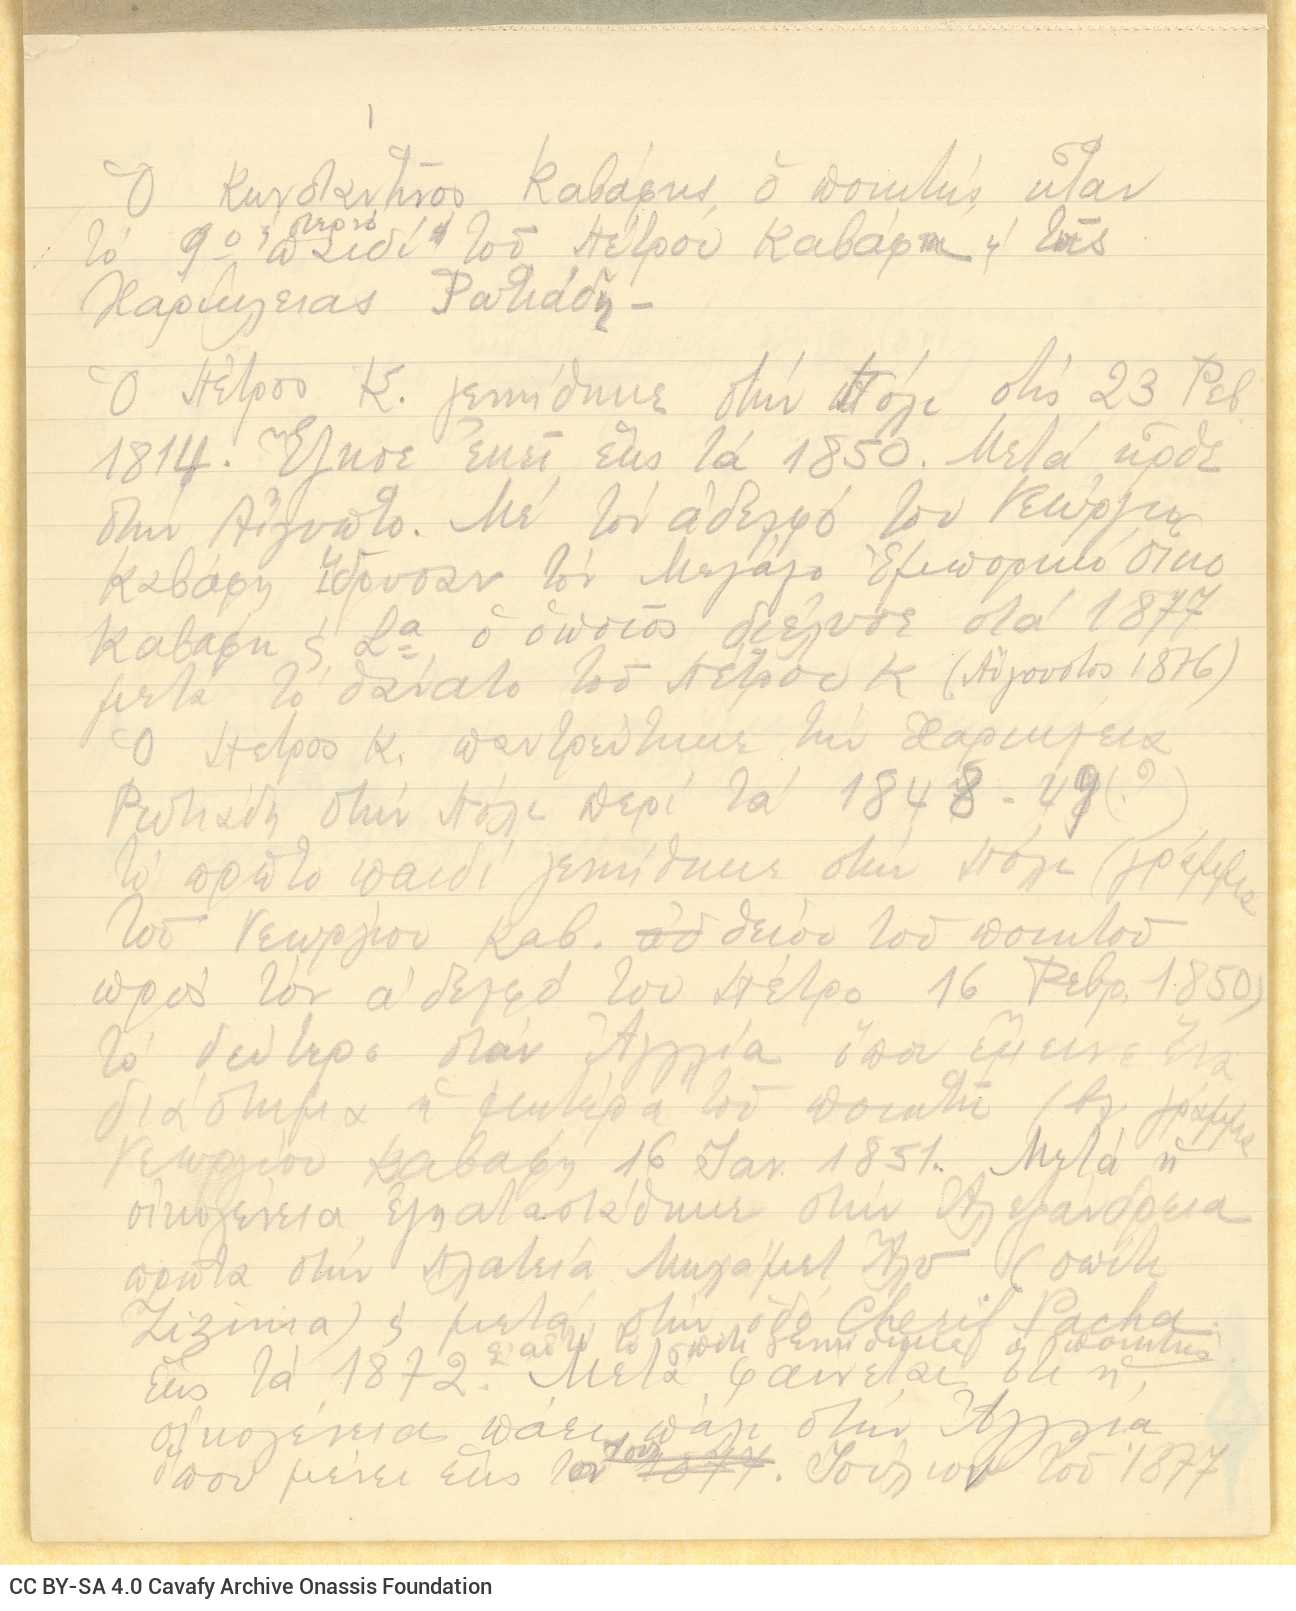 Handwritten text by Rica Singopoulo on the recto of thirteen sheets from a notepad. Blank versos. Seven sheets have been torn